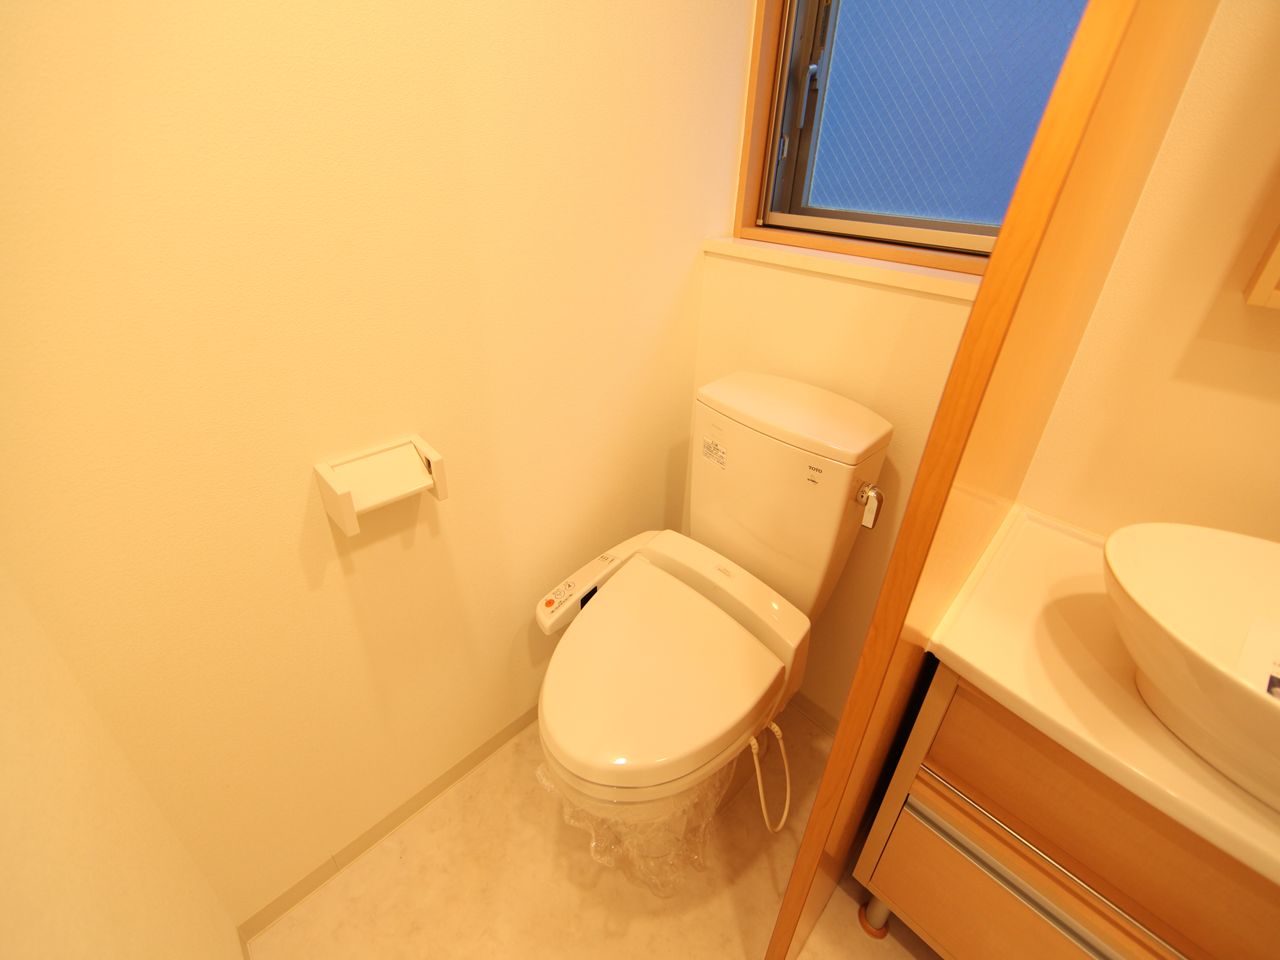 Toilet. Toilet with warm water washing toilet seat With windows (ventilation good)